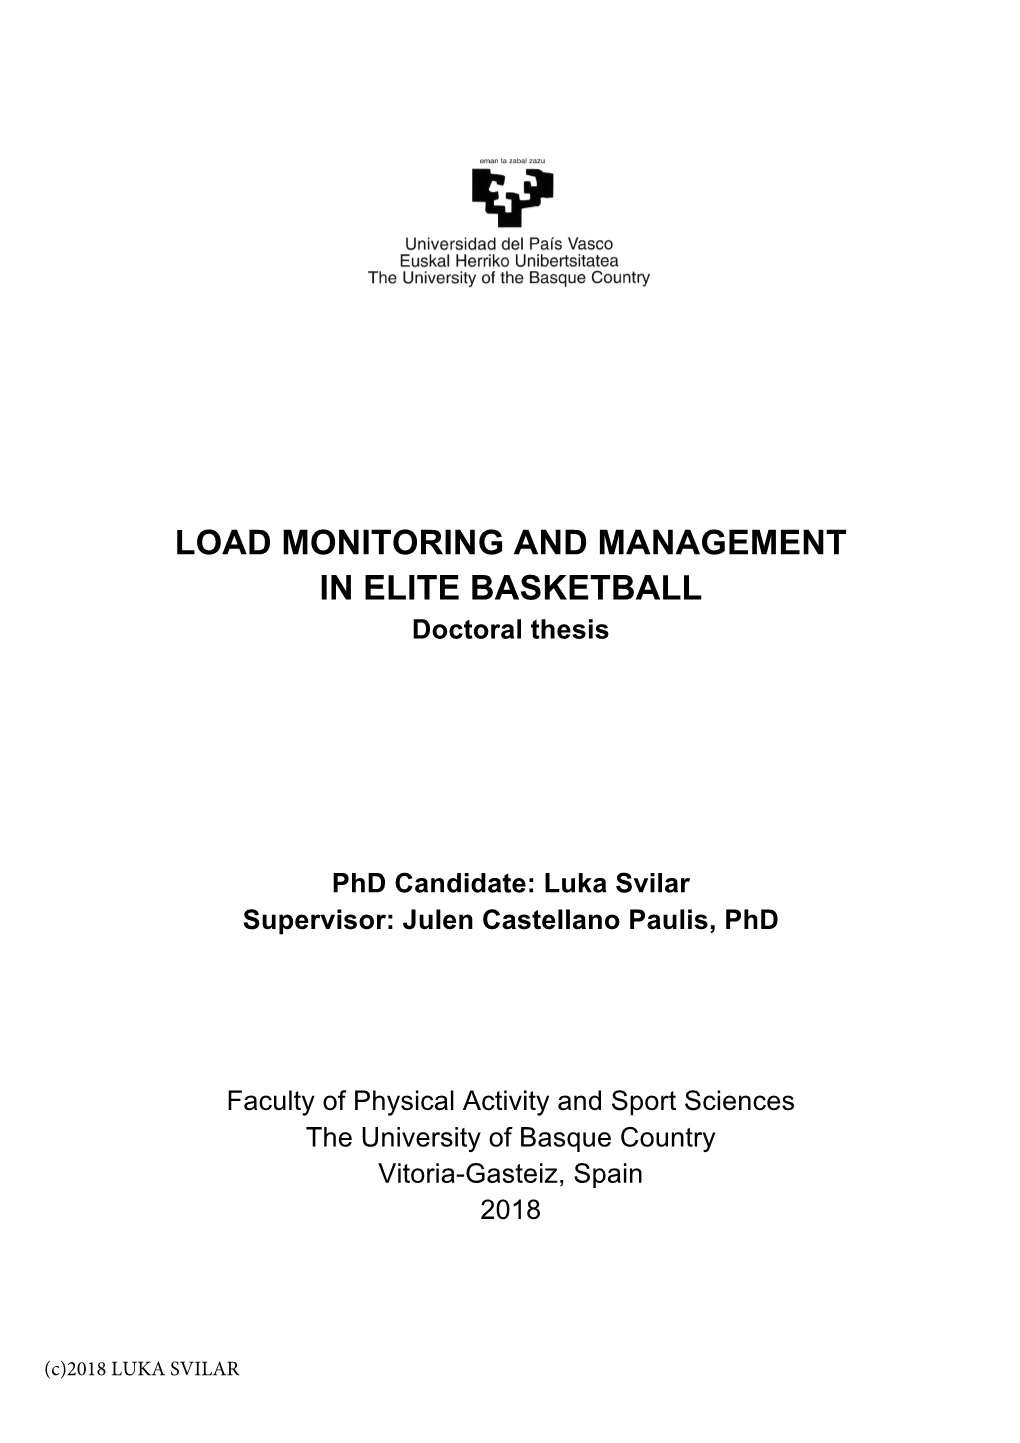 LOAD MONITORING and MANAGEMENT in ELITE BASKETBALL Doctoral Thesis